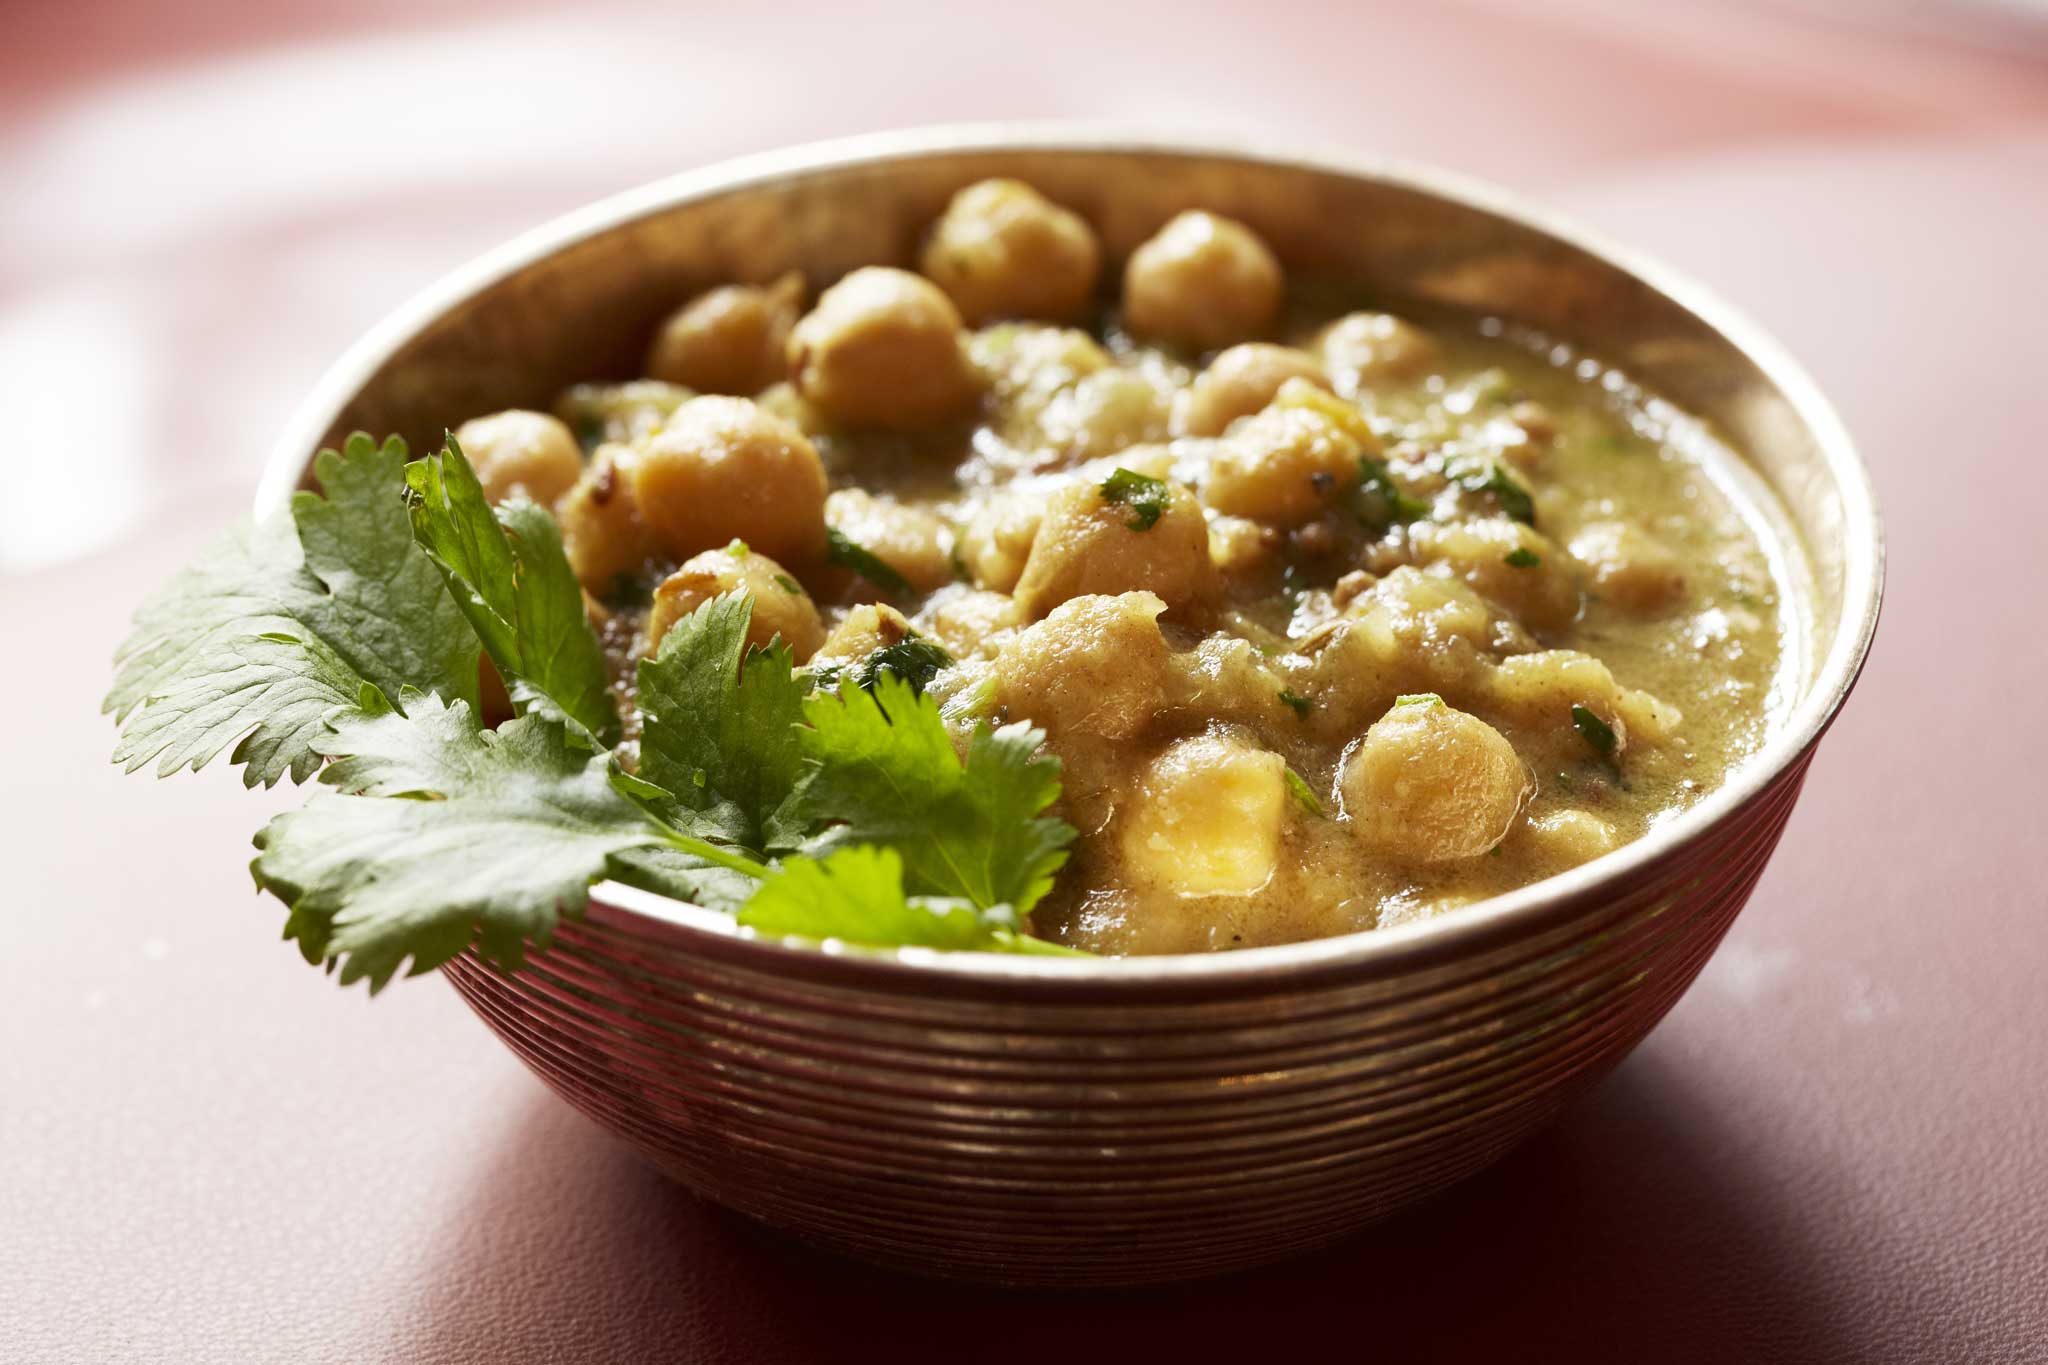 Chickpea and coconut curry makes a great vegetarian main course